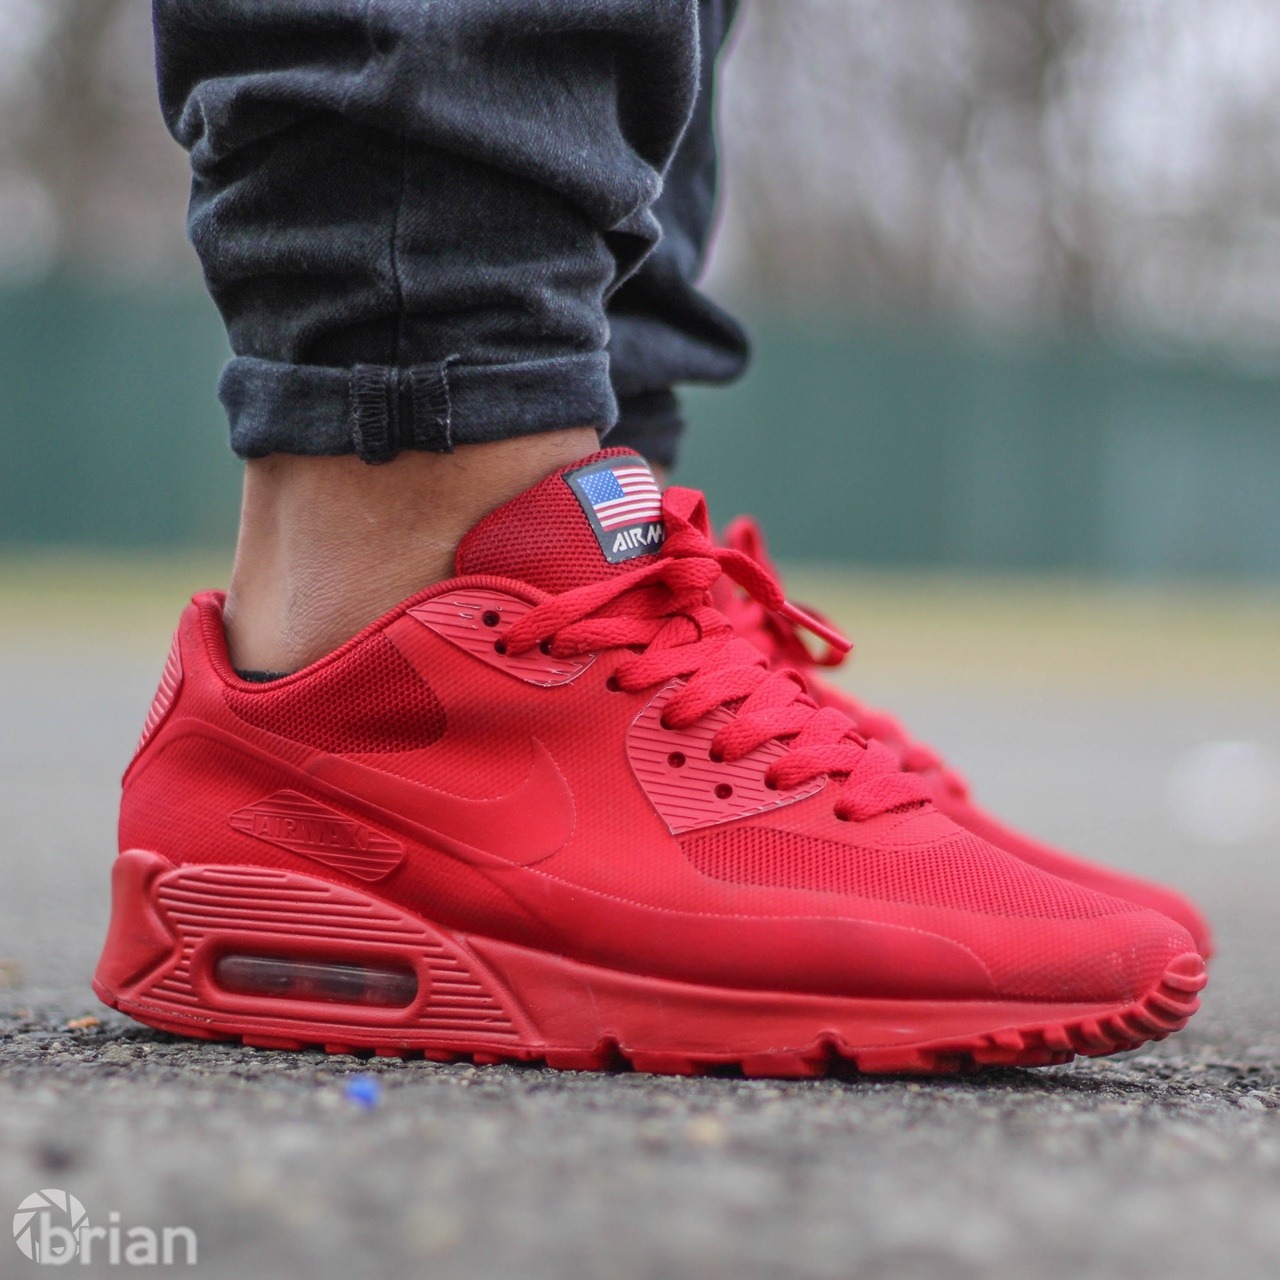 Nike Air Max 90 Hyperfuse ‘independence Day’ Red Sweetsoles Sneakers Kicks And Trainers